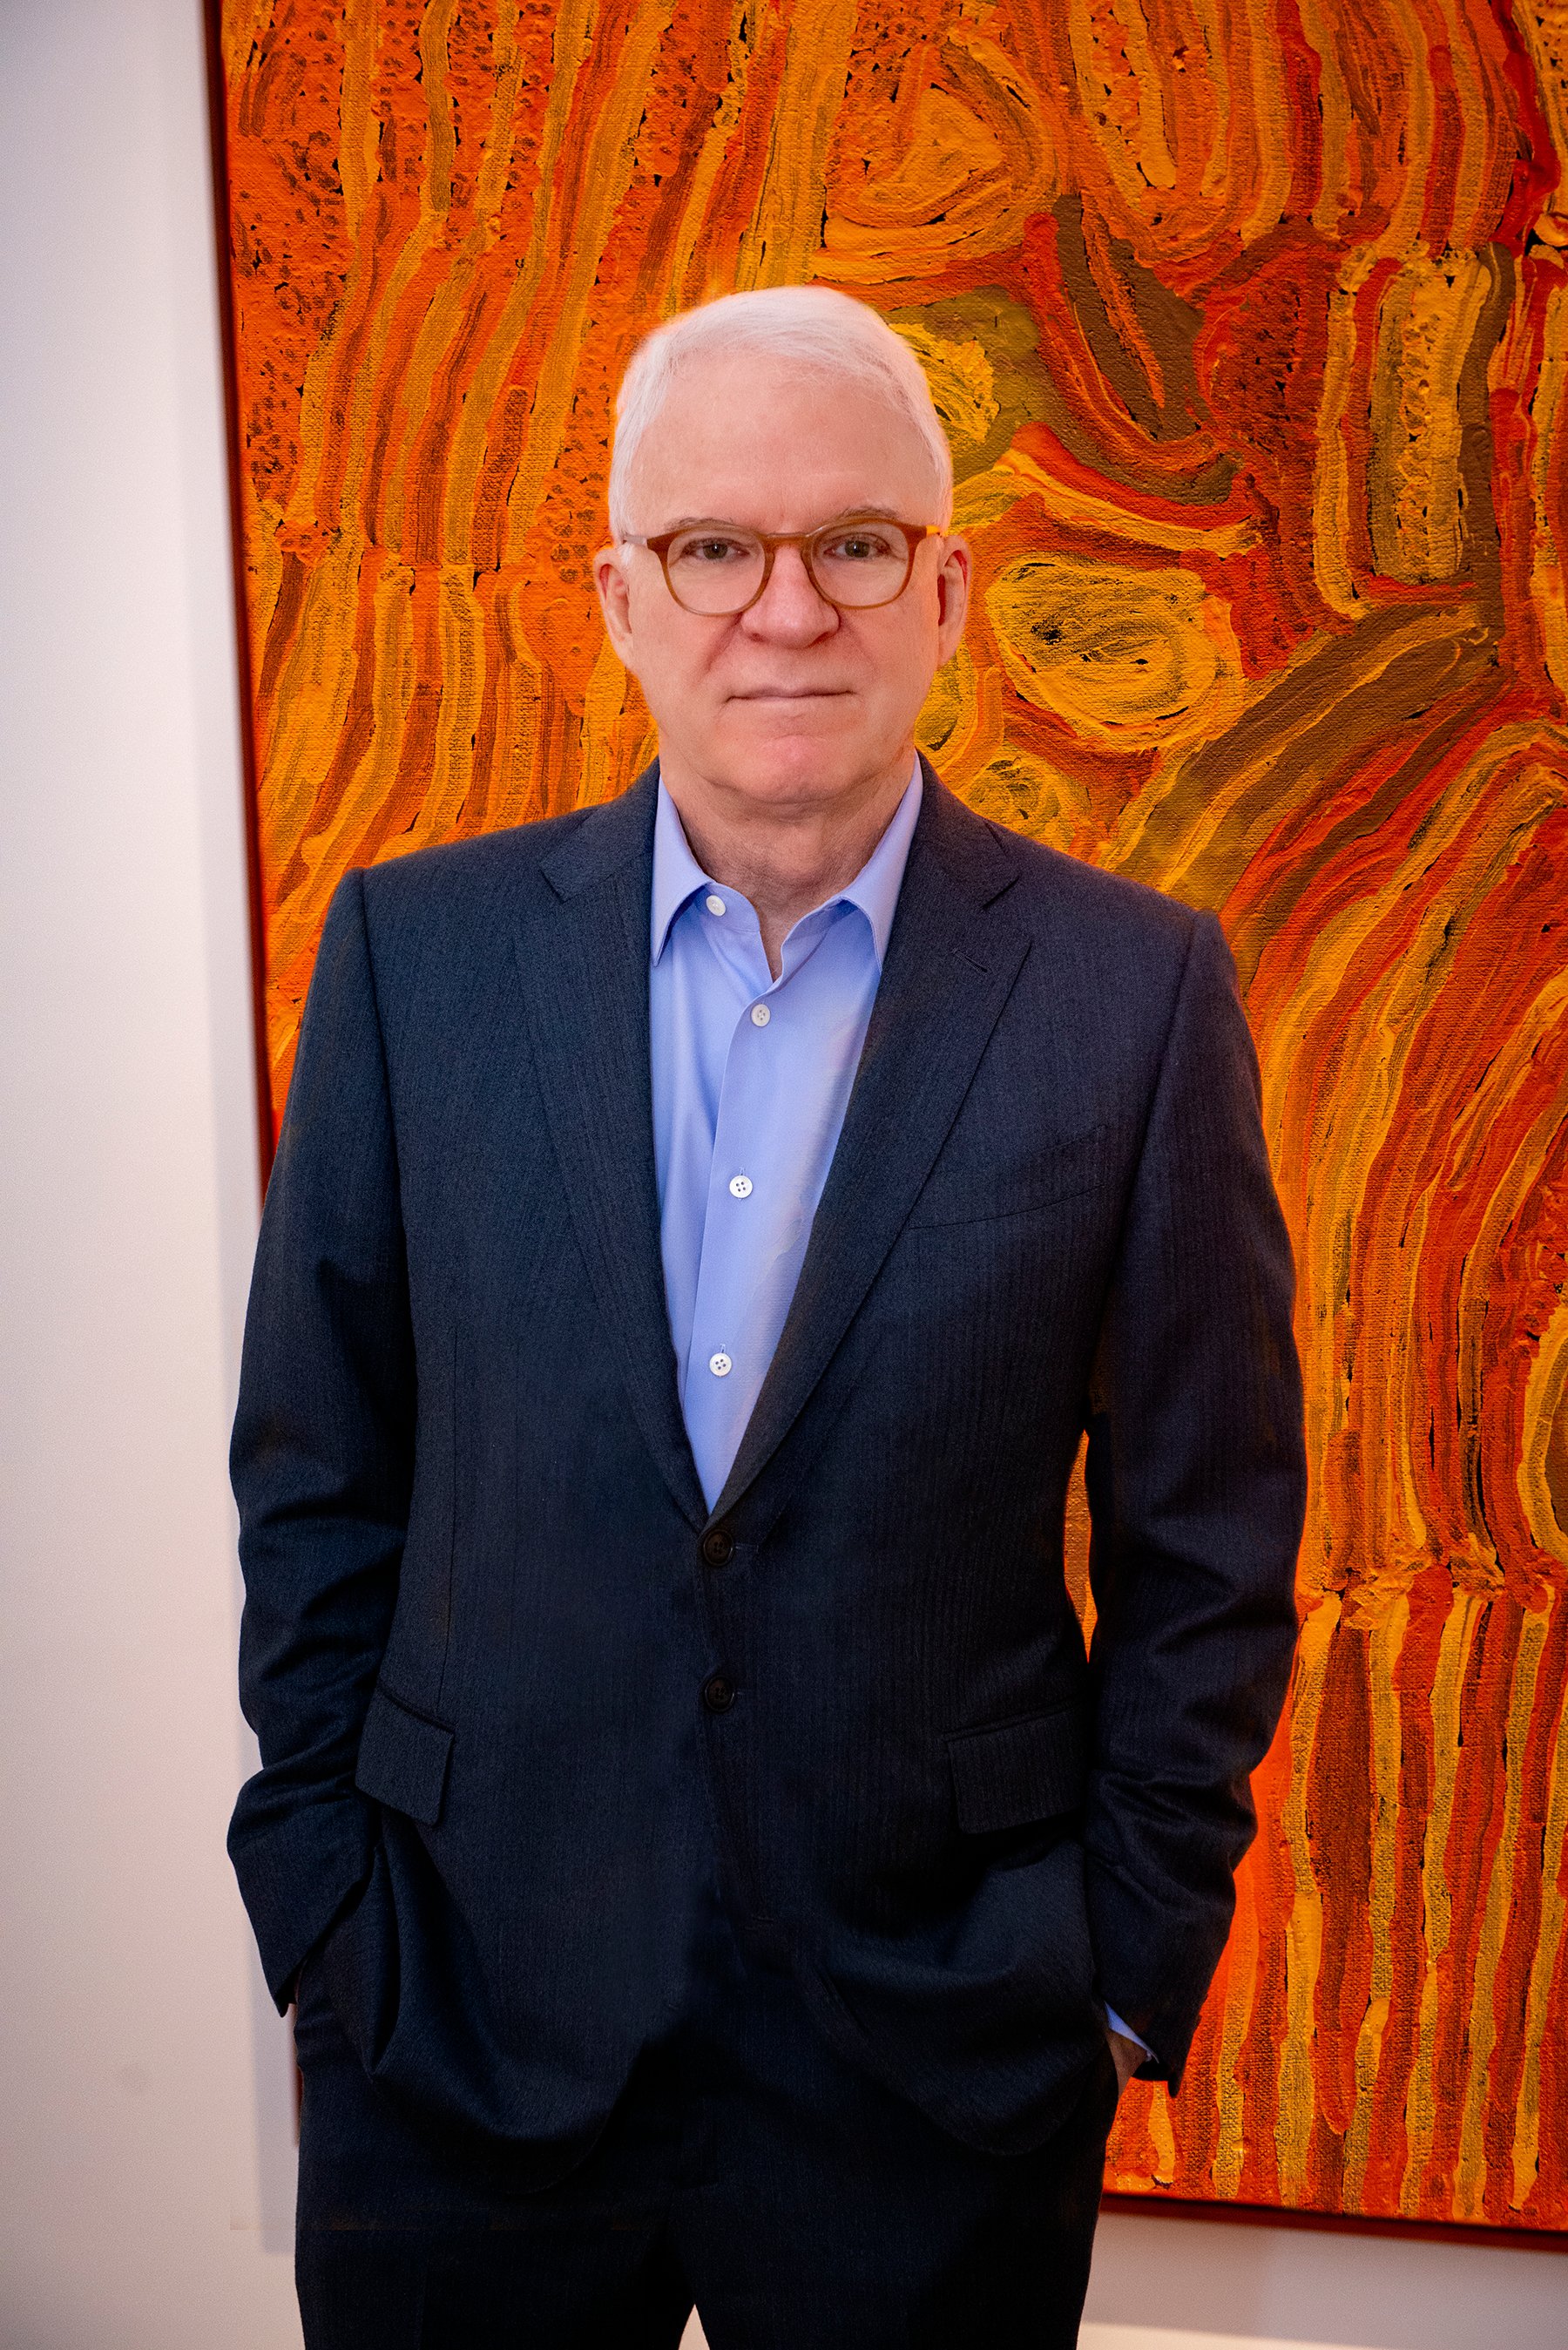 Actor Steve Martin Amassed Stellar of Australian Aboriginal Art at Speed—and Now You Can See It at Gagosian | Artnet News